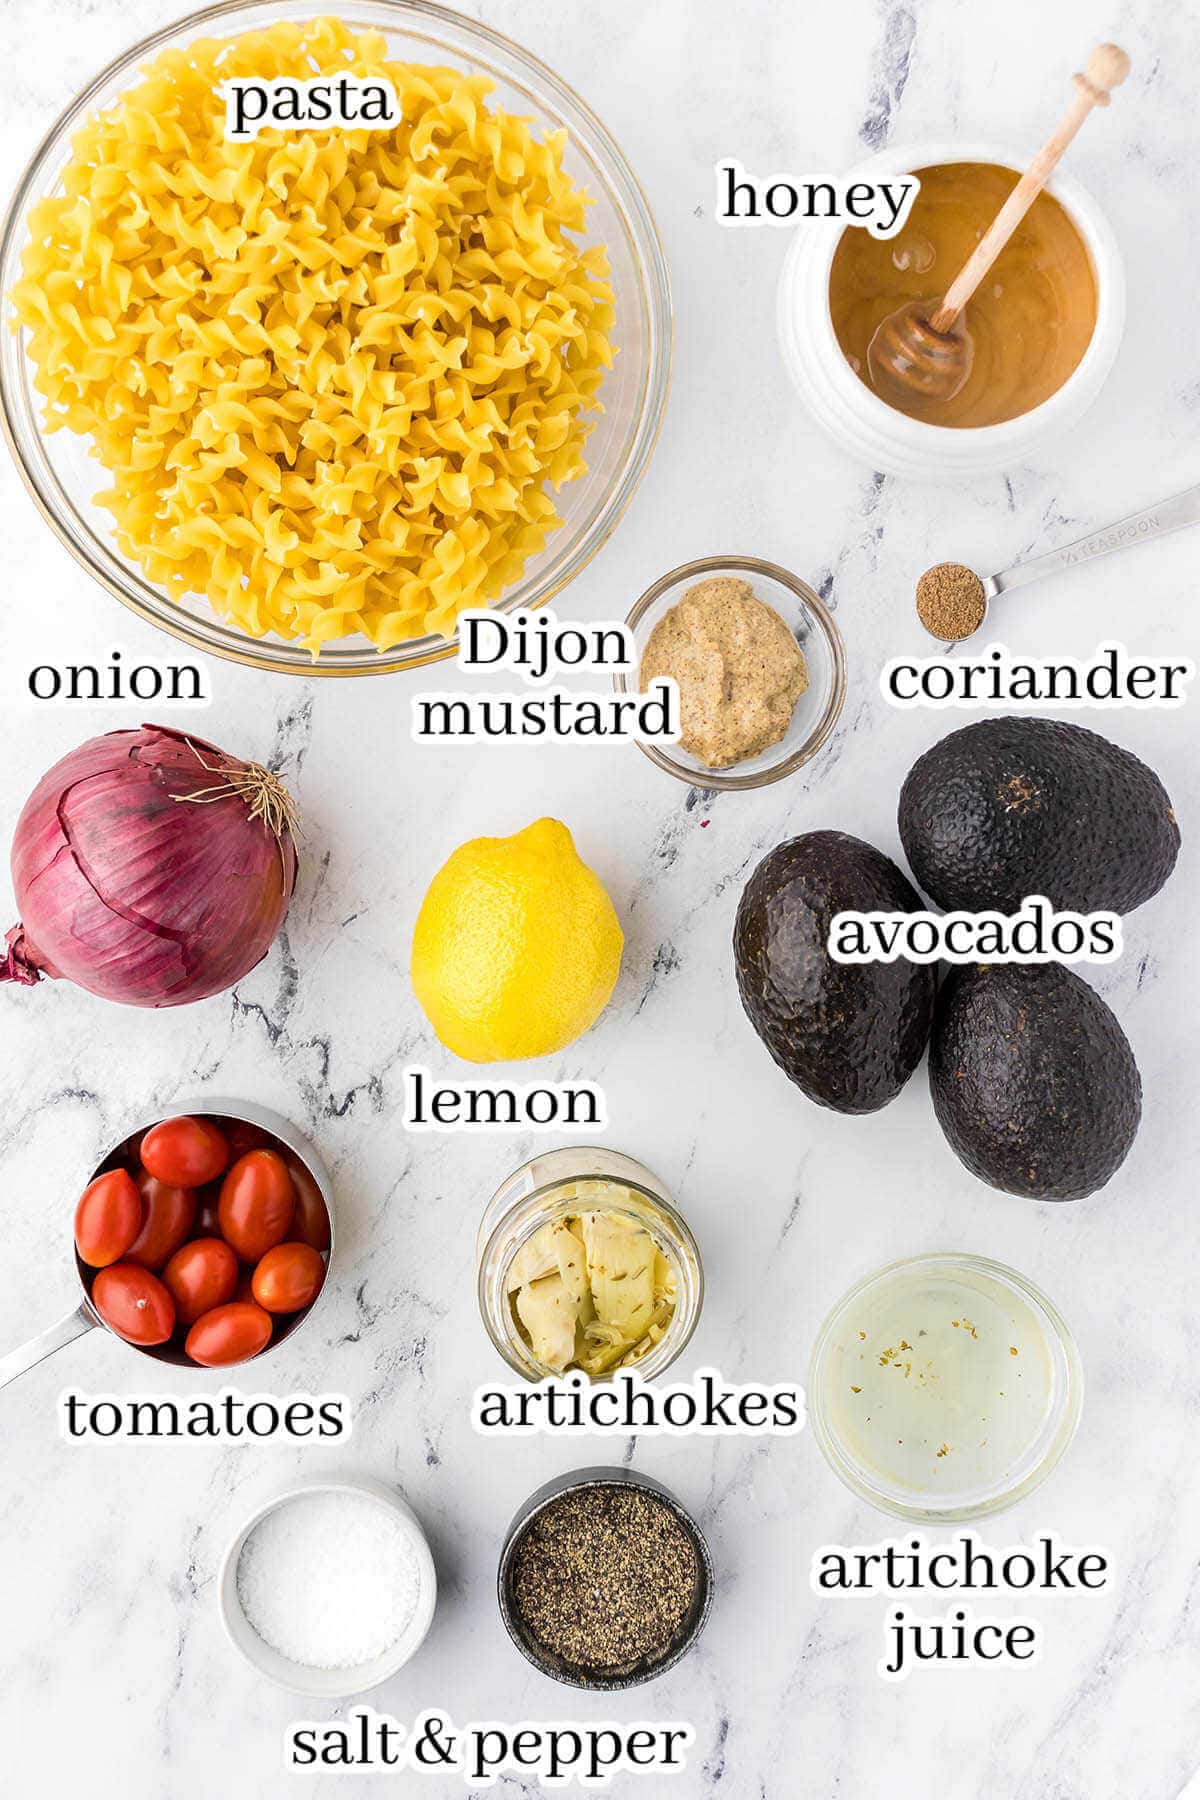 Ingredients to make salad recipes, with print overlay.